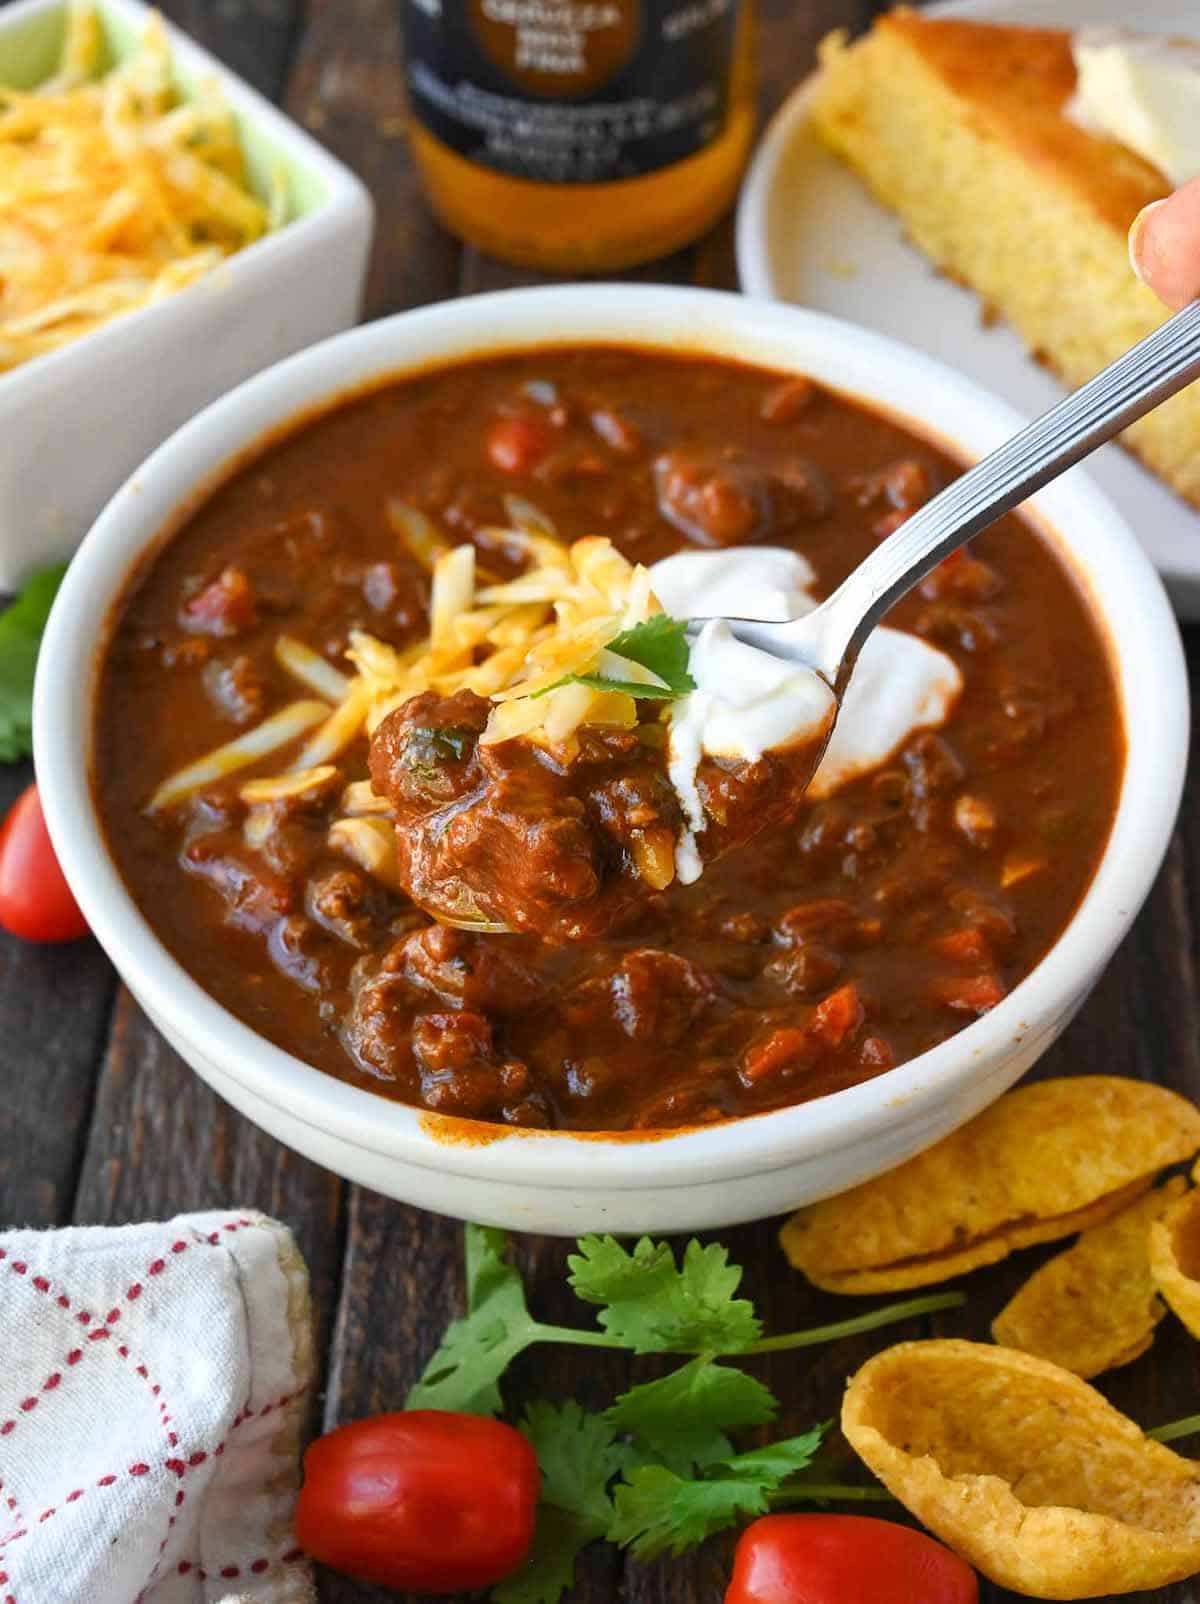 A spoon scooping up some no bean chili.